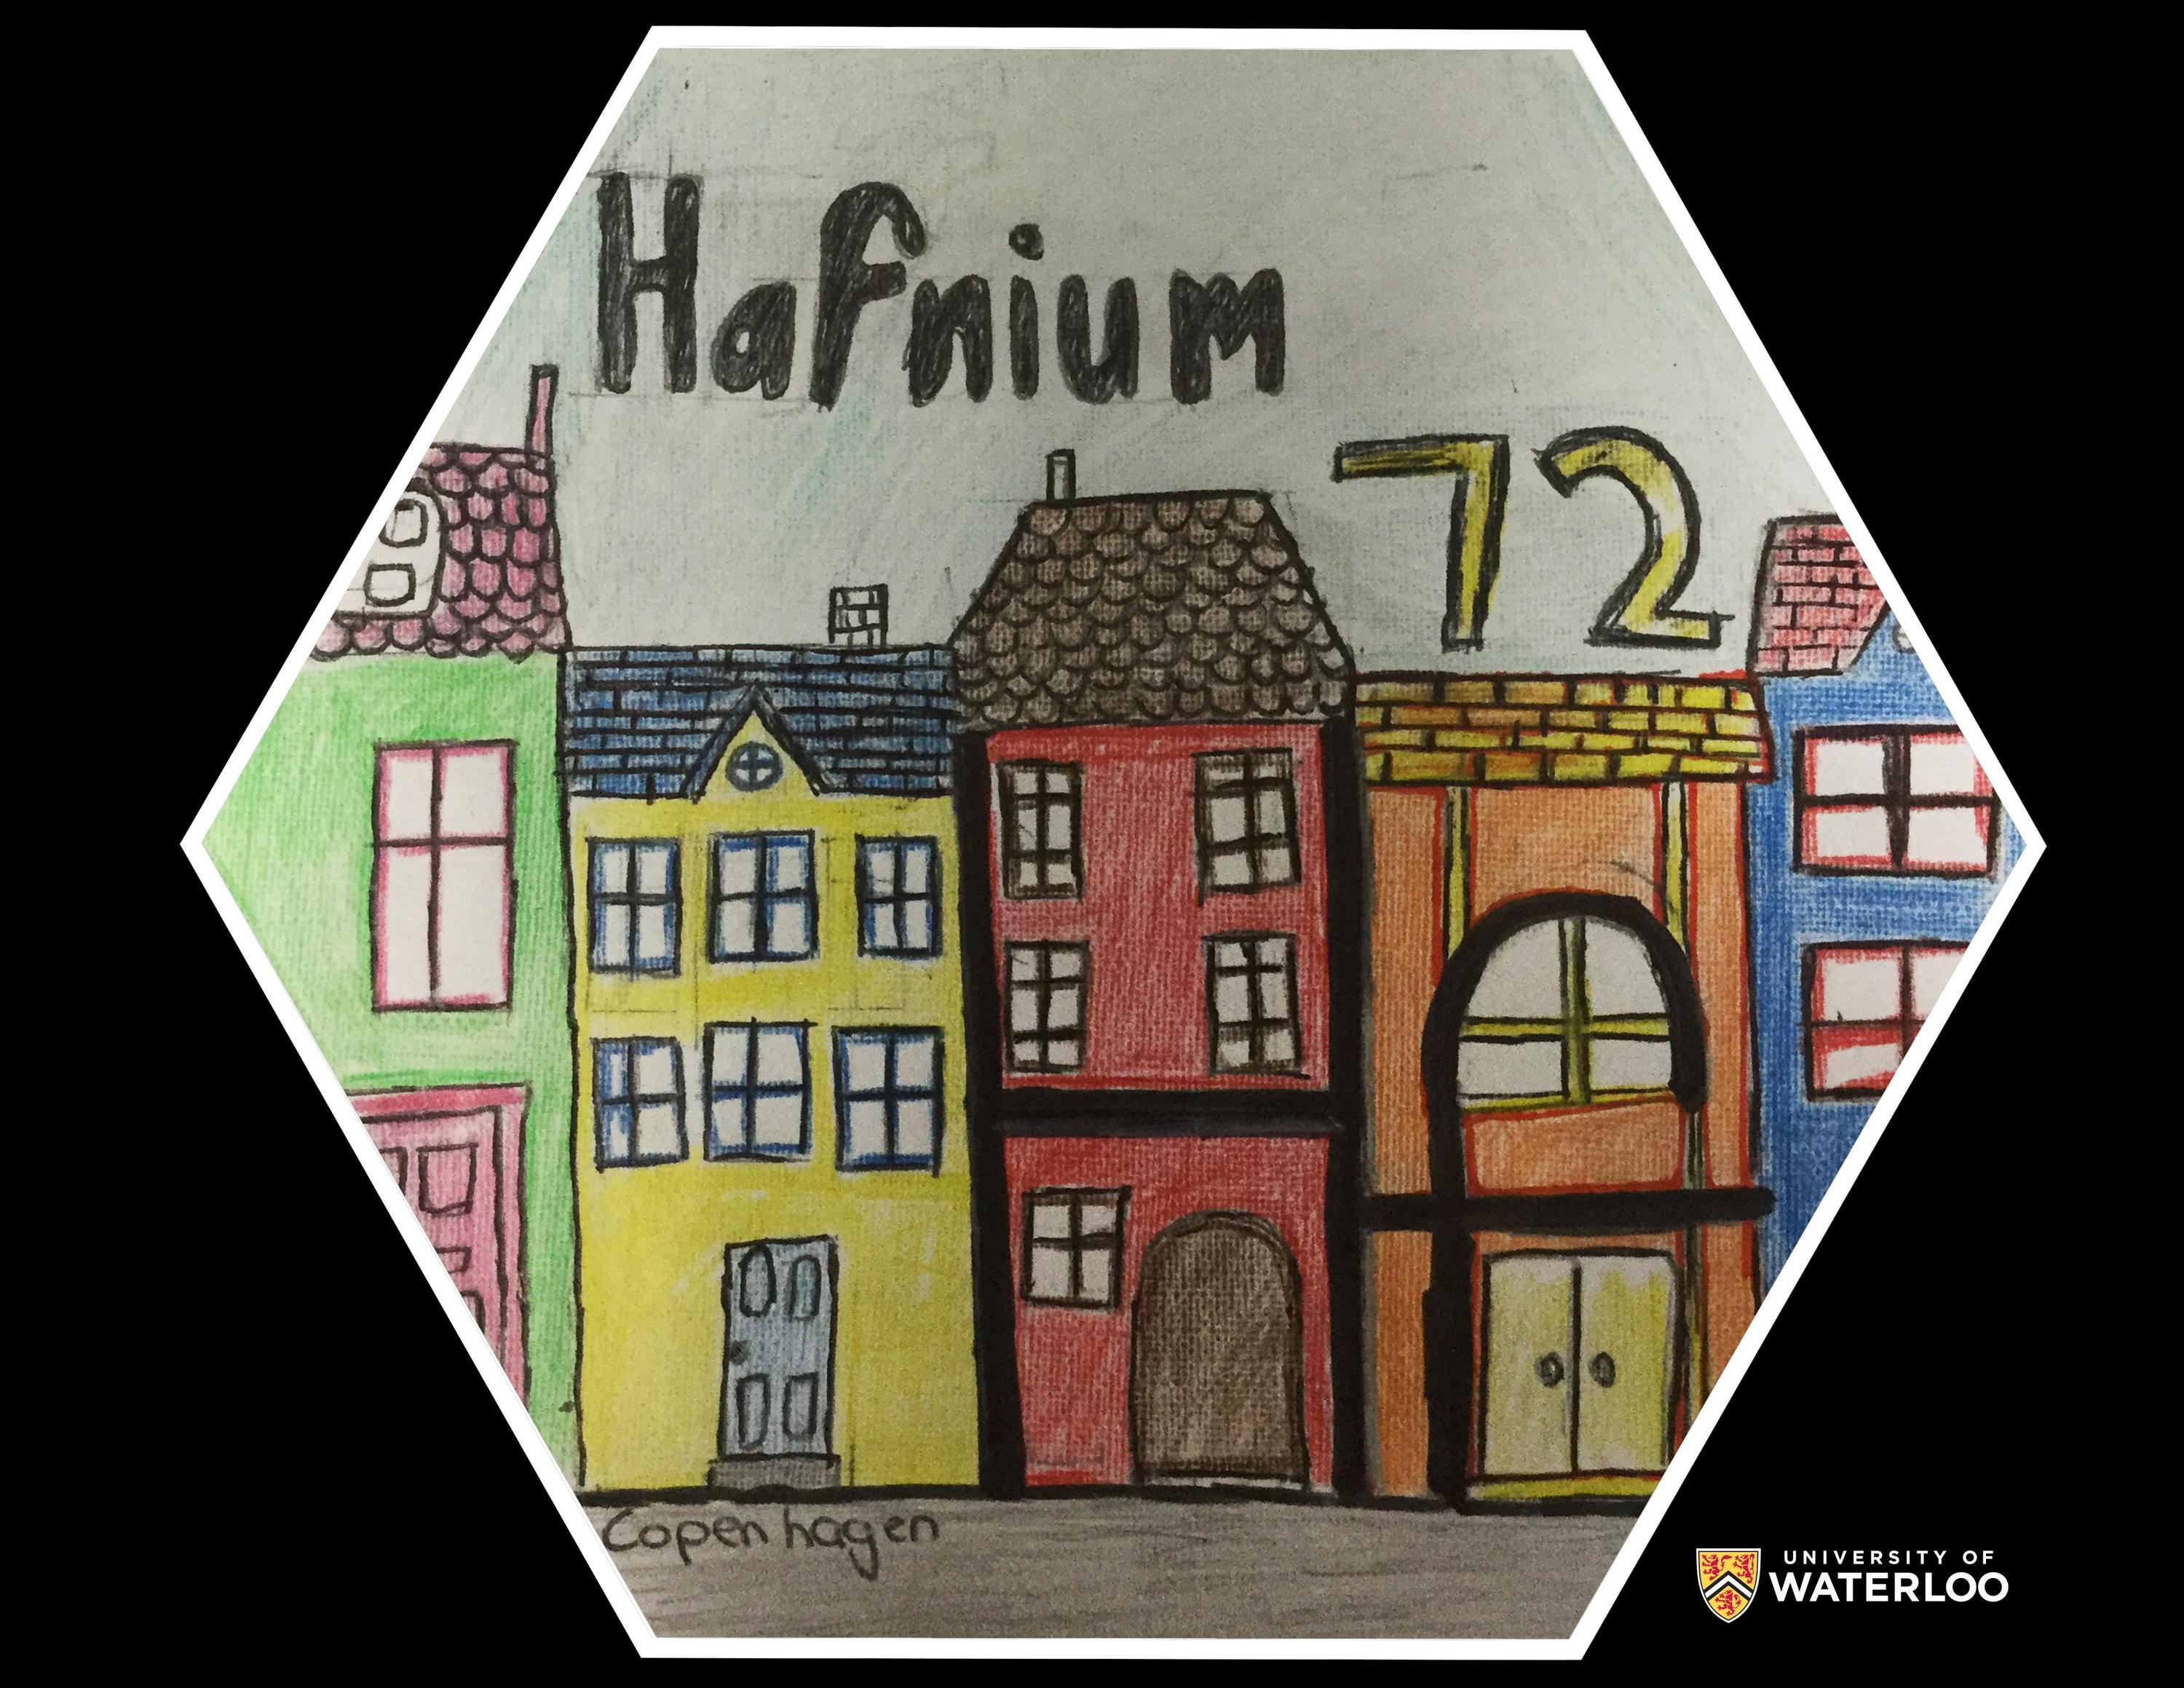 Coloured pencil on paper. A series of traditional row houses in Copenhagen. Above them, “Hafnium” and the atomic number “72”.